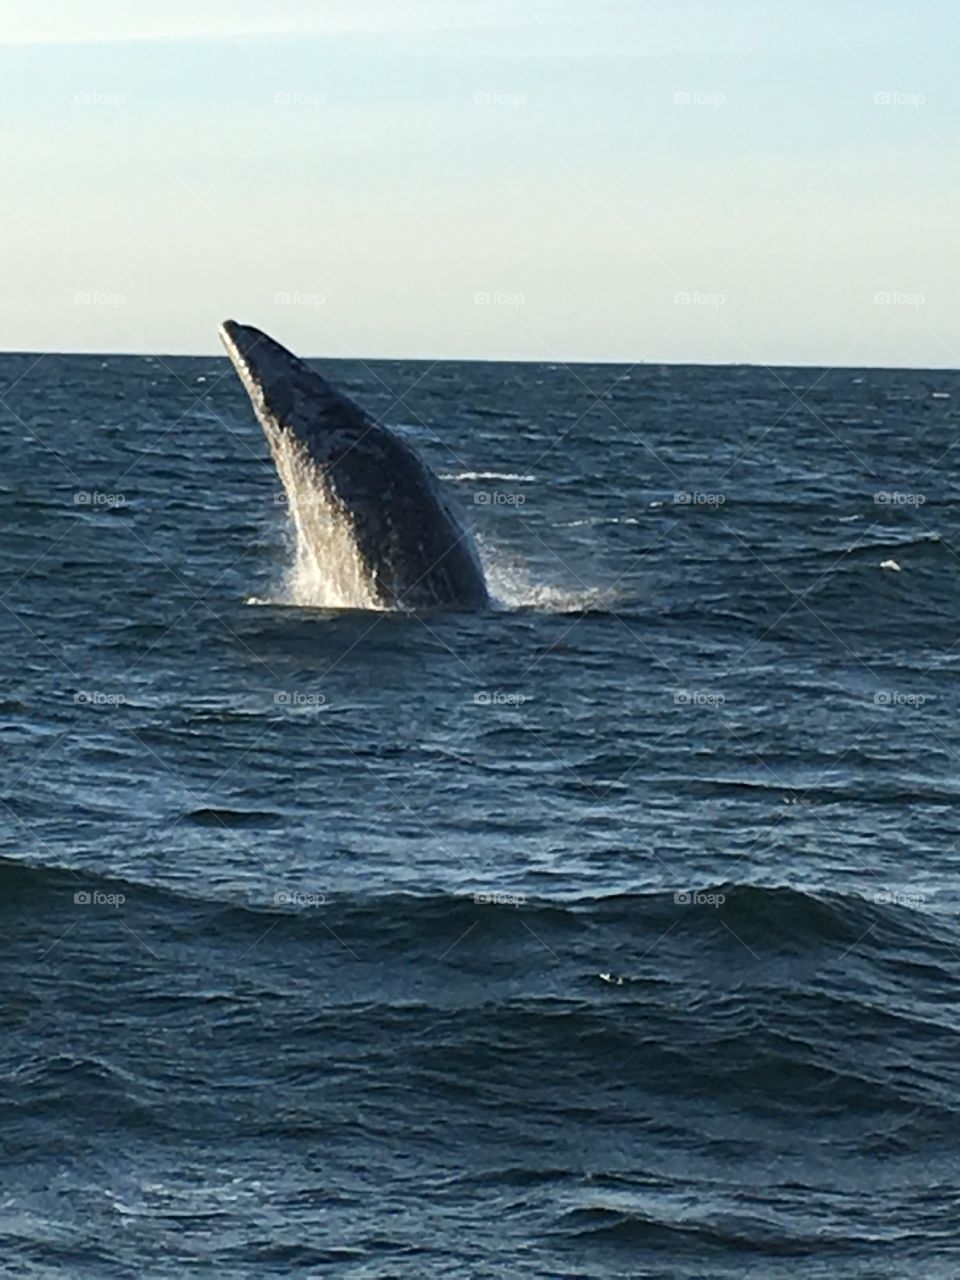 Whale watching at Dana Point California